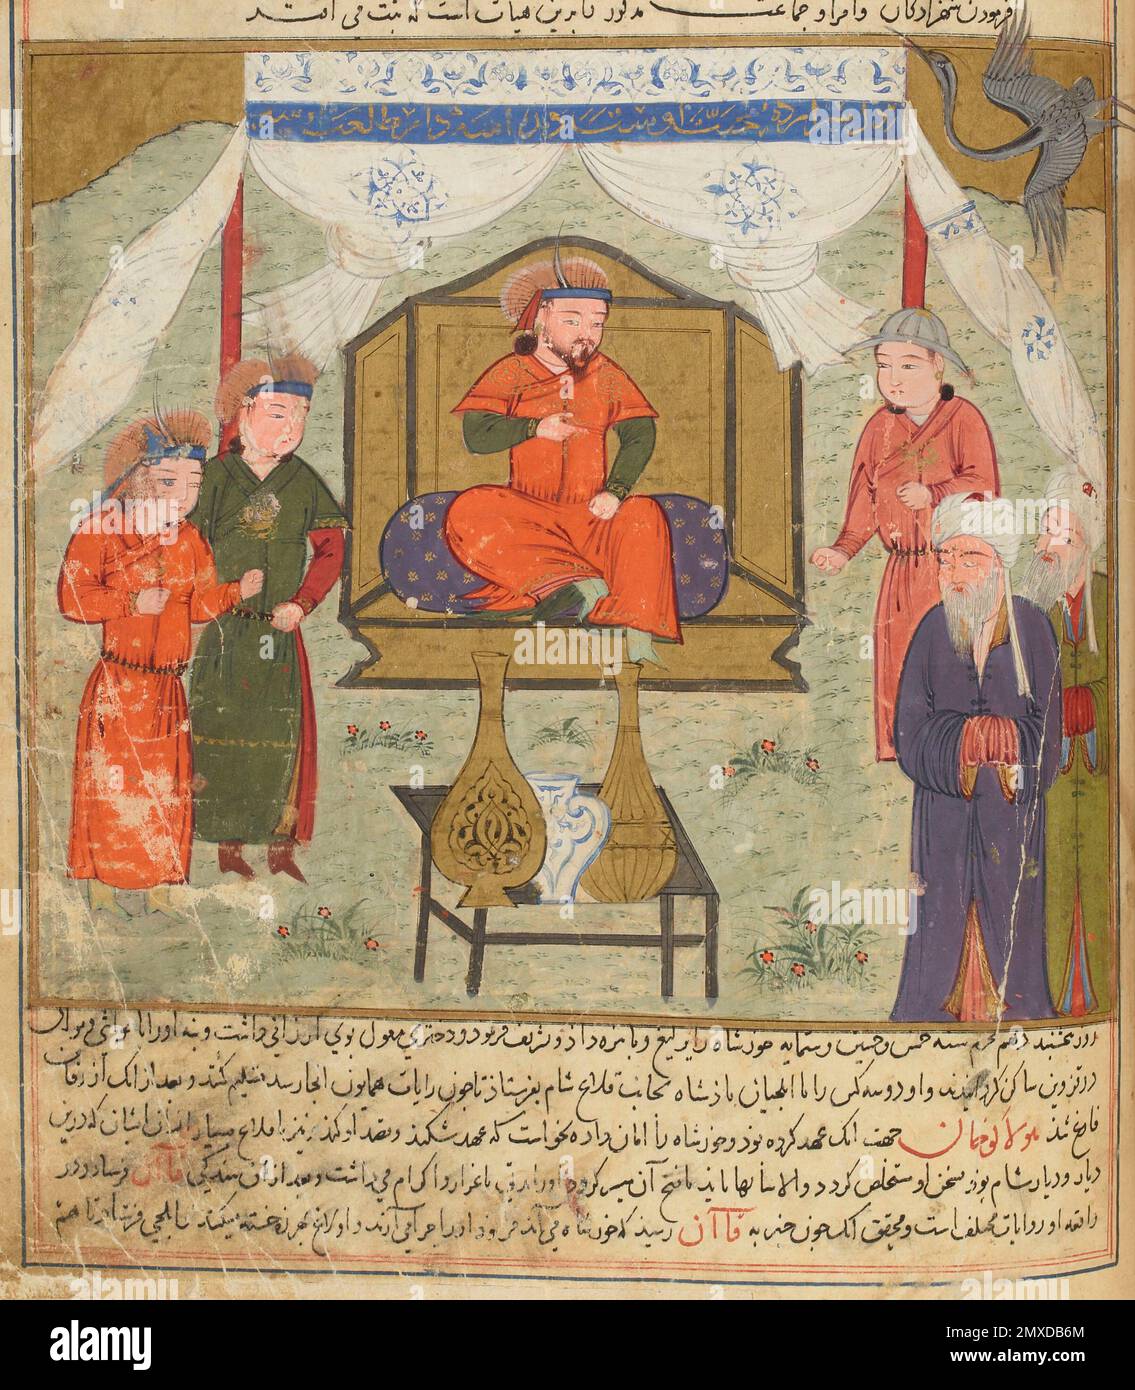 Hulagu Khan and Courtiers. Miniature from Jami' al-tawarikh (Universal History). Museum: BIBLIOTHEQUE NATIONALE DE FRANCE. Author: ANONYMOUS. Stock Photo